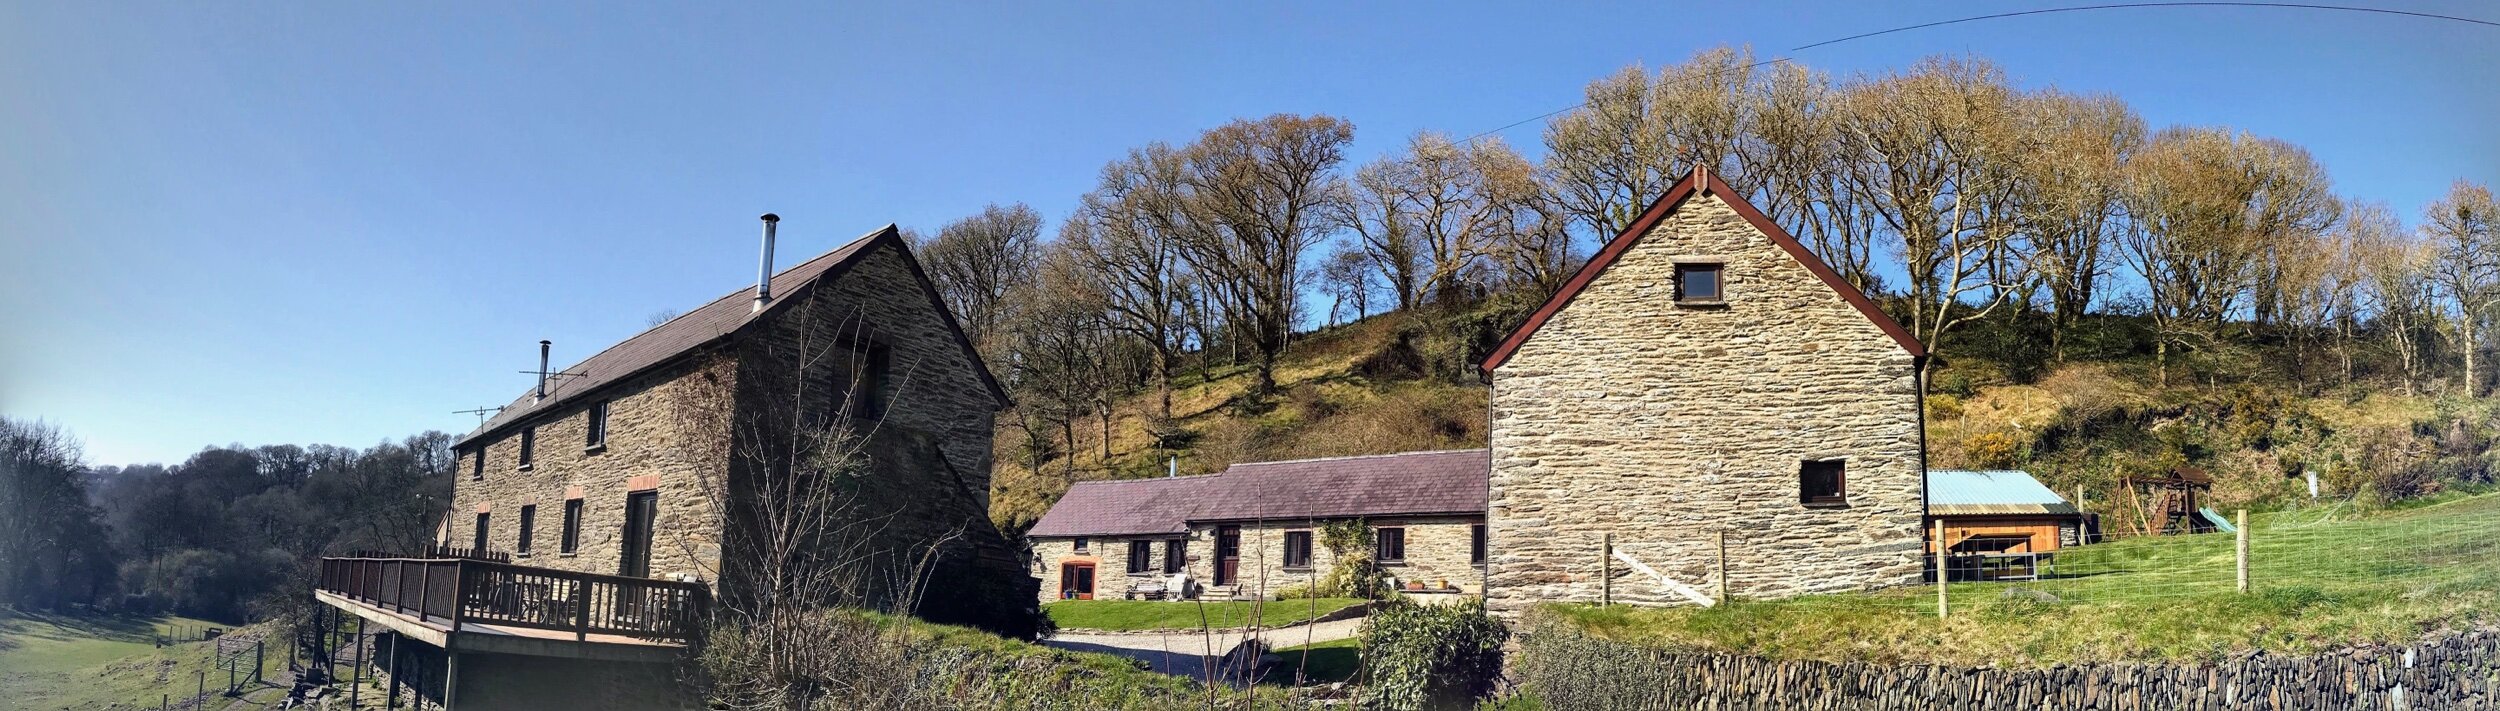 Panorama of the holiday cottages